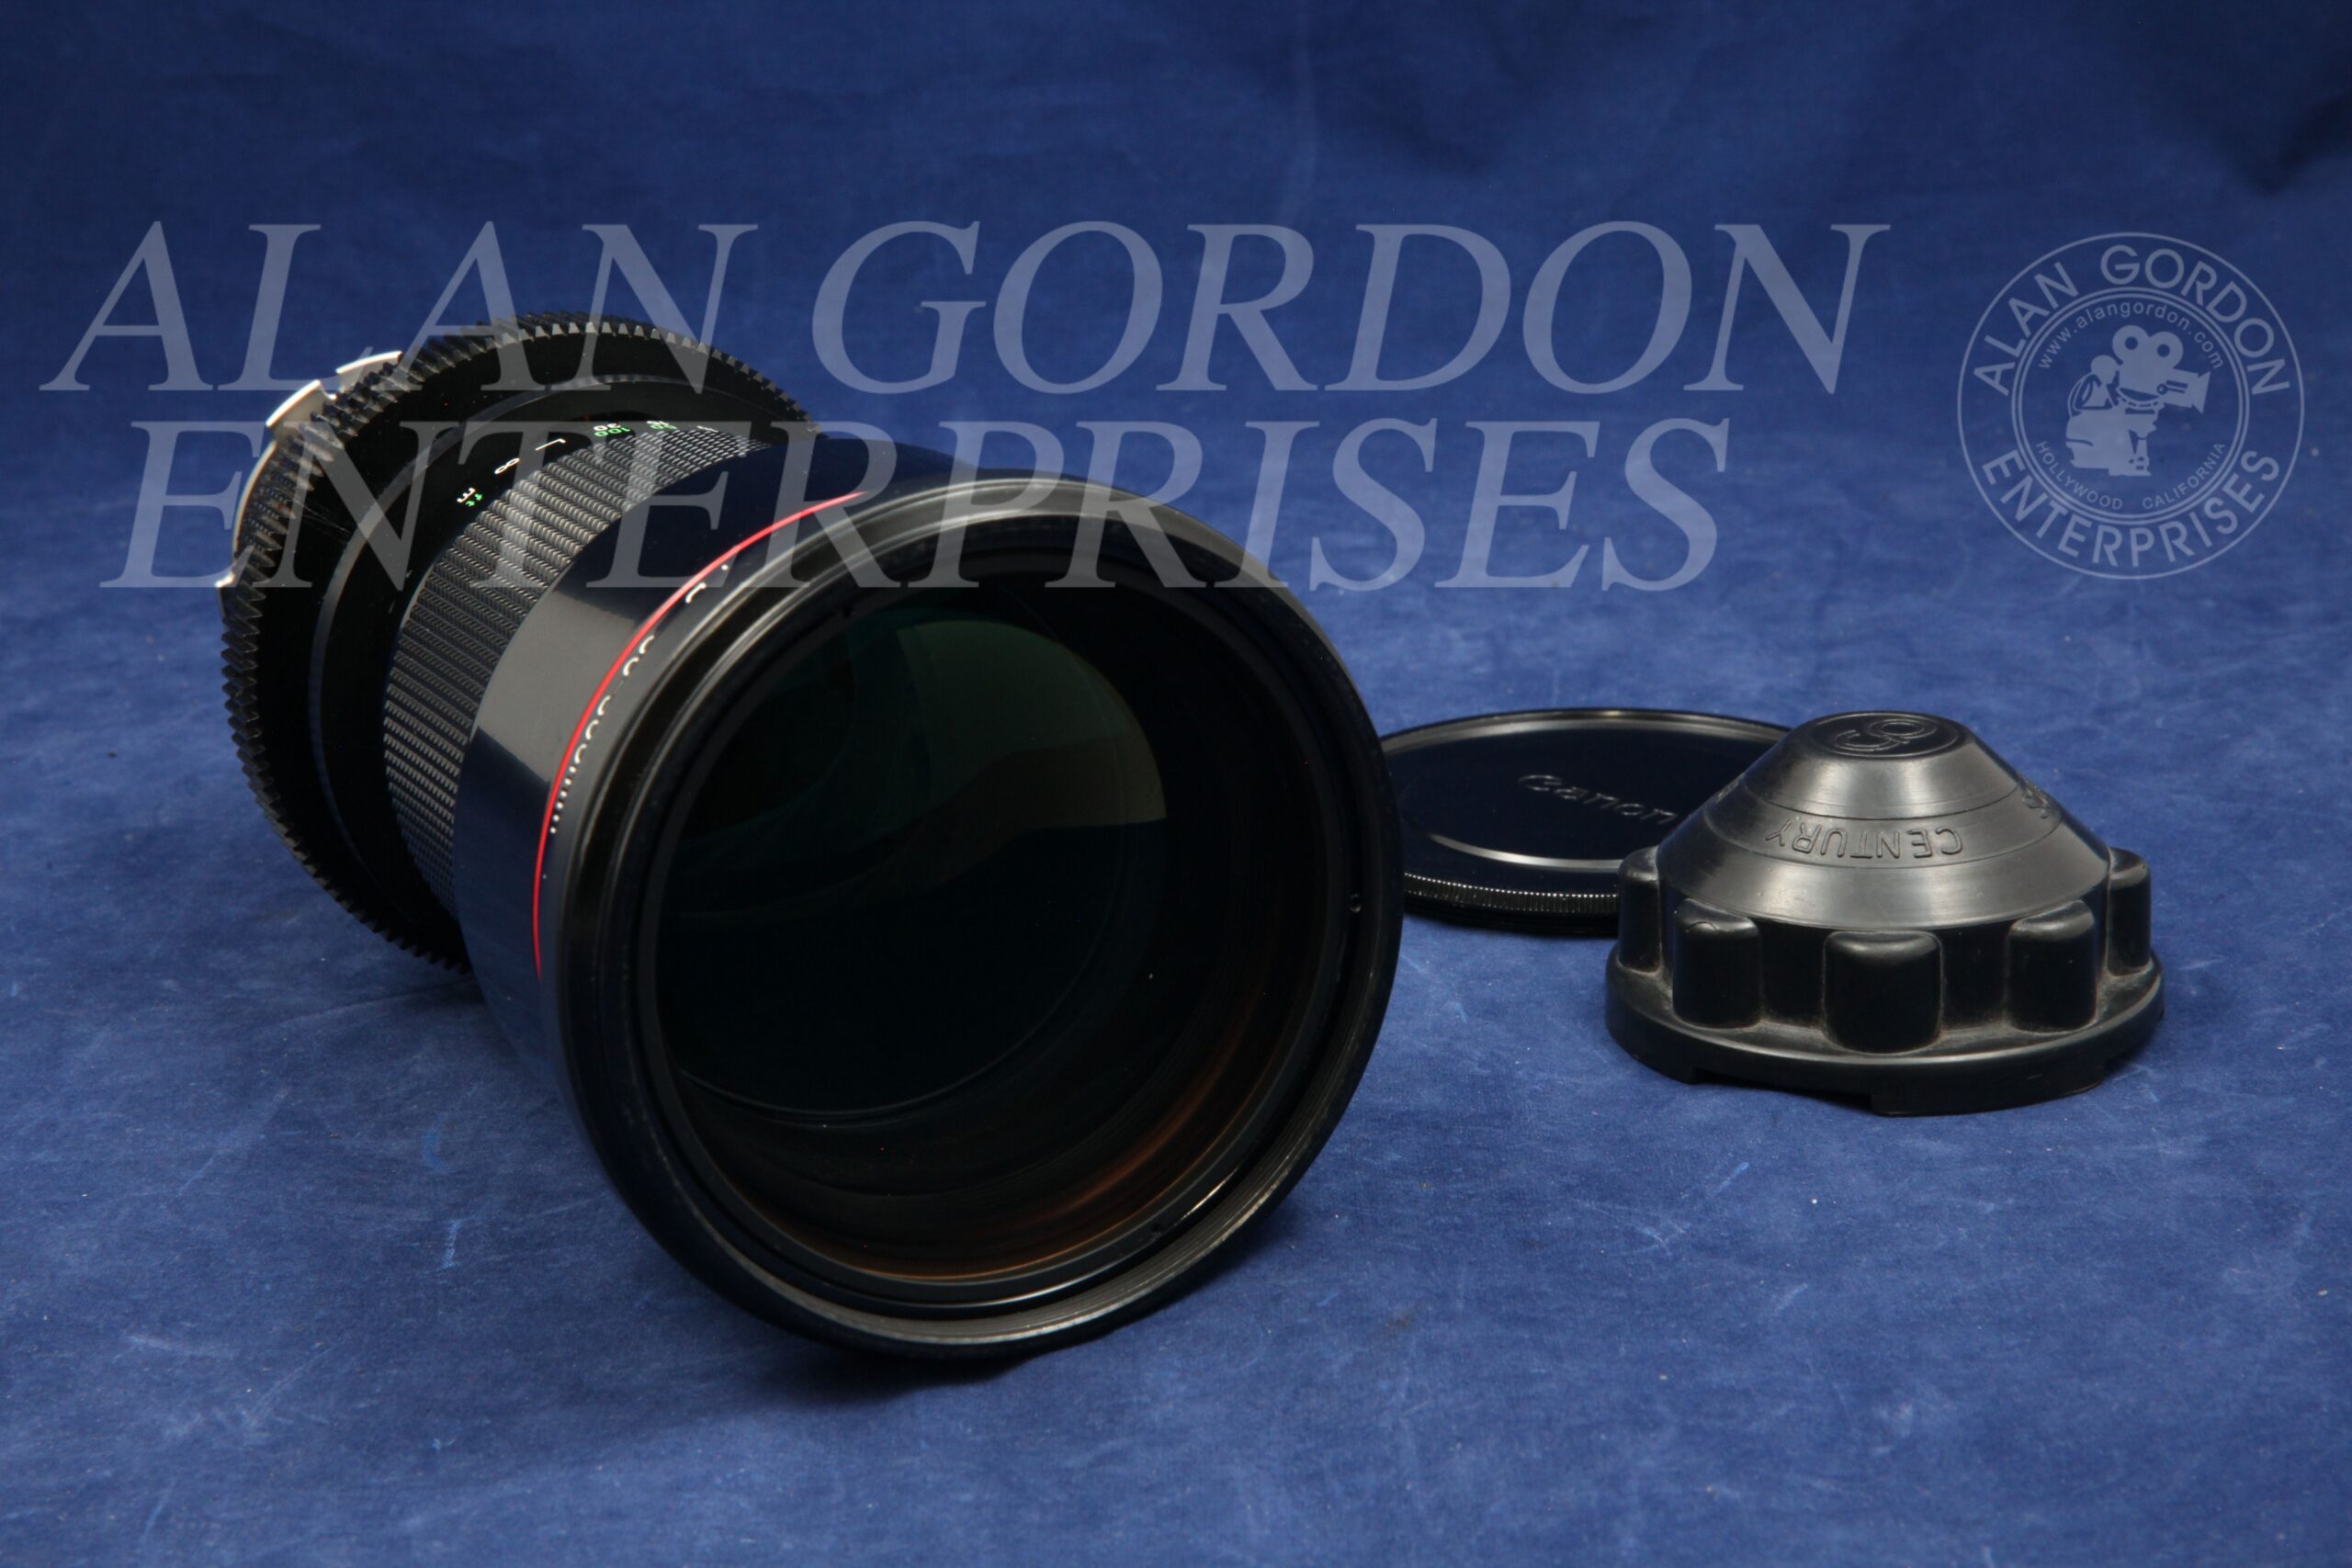 Used 50-300mm Canon Zoom Lens T4.5 PL Mount (S/N C33935)